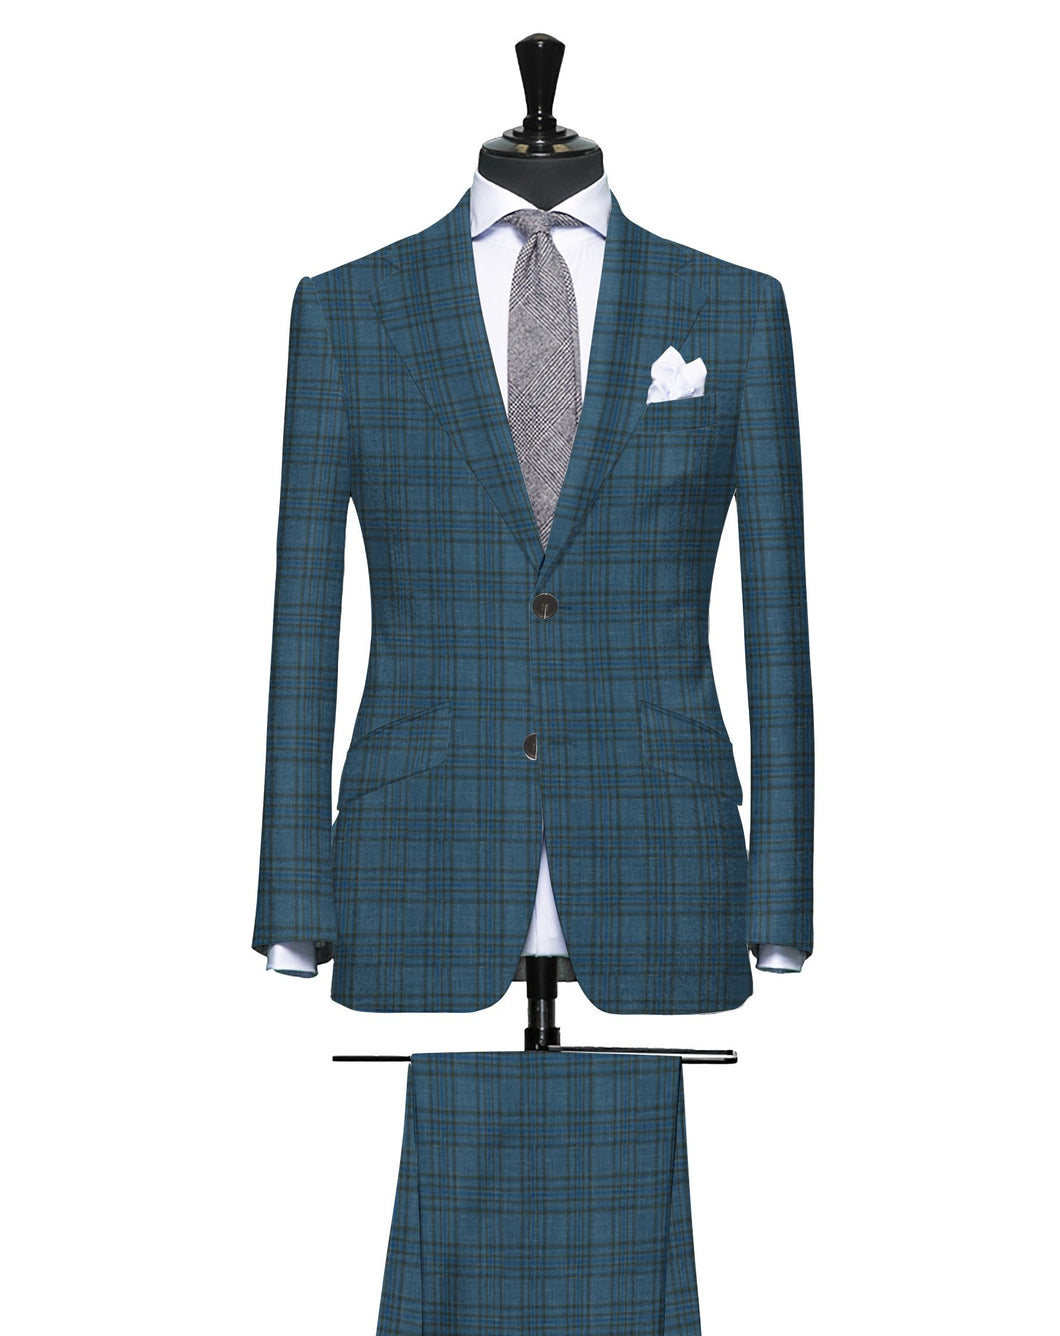 Multi Layered Shades of Blue with Brown Plaid Pattern, Super 160, Linen Silk Wool